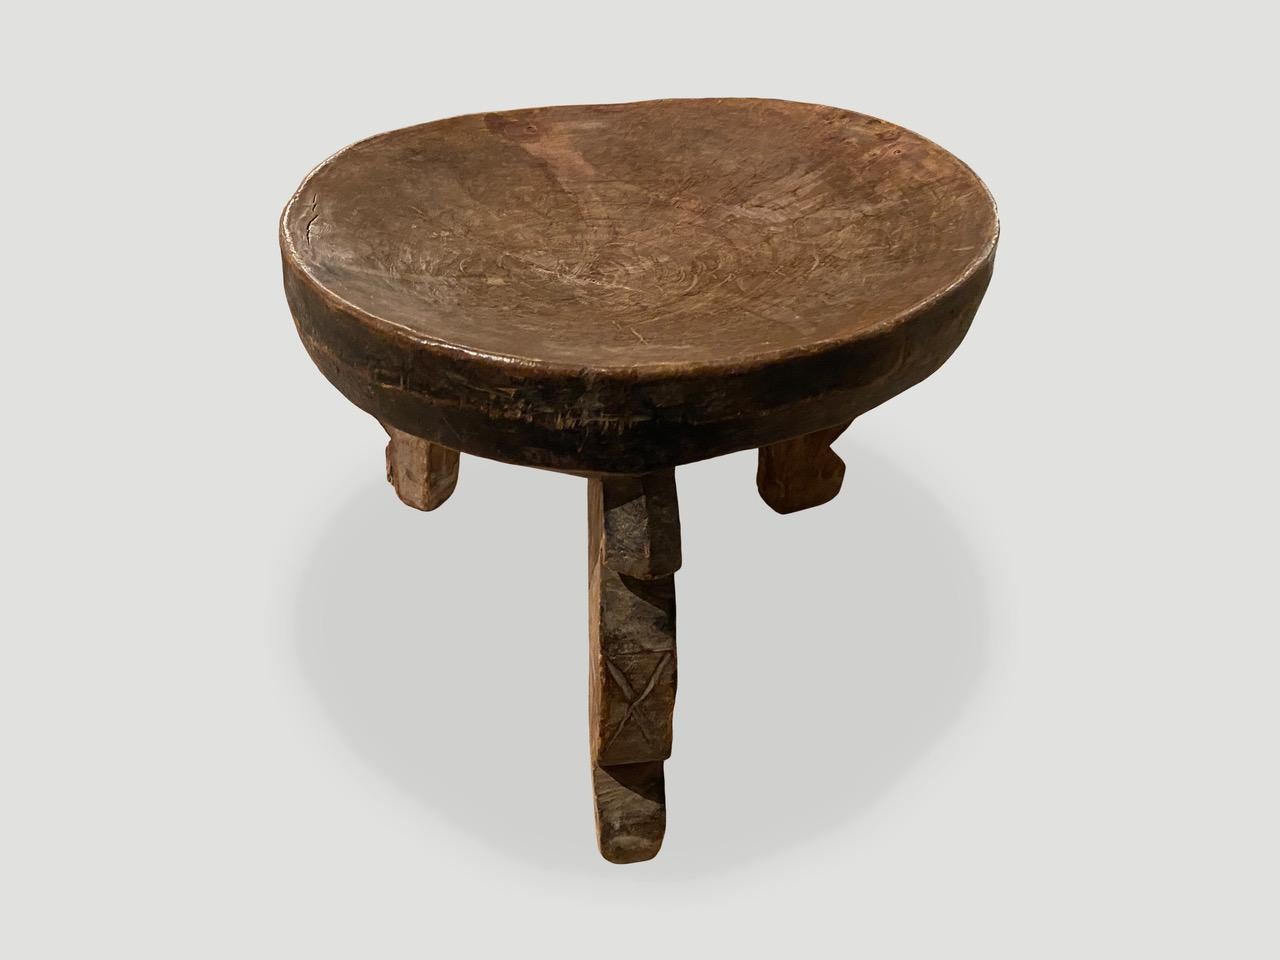 Tribal Andrianna Shamaris Antique African Tray Side Table or Bowl For Sale